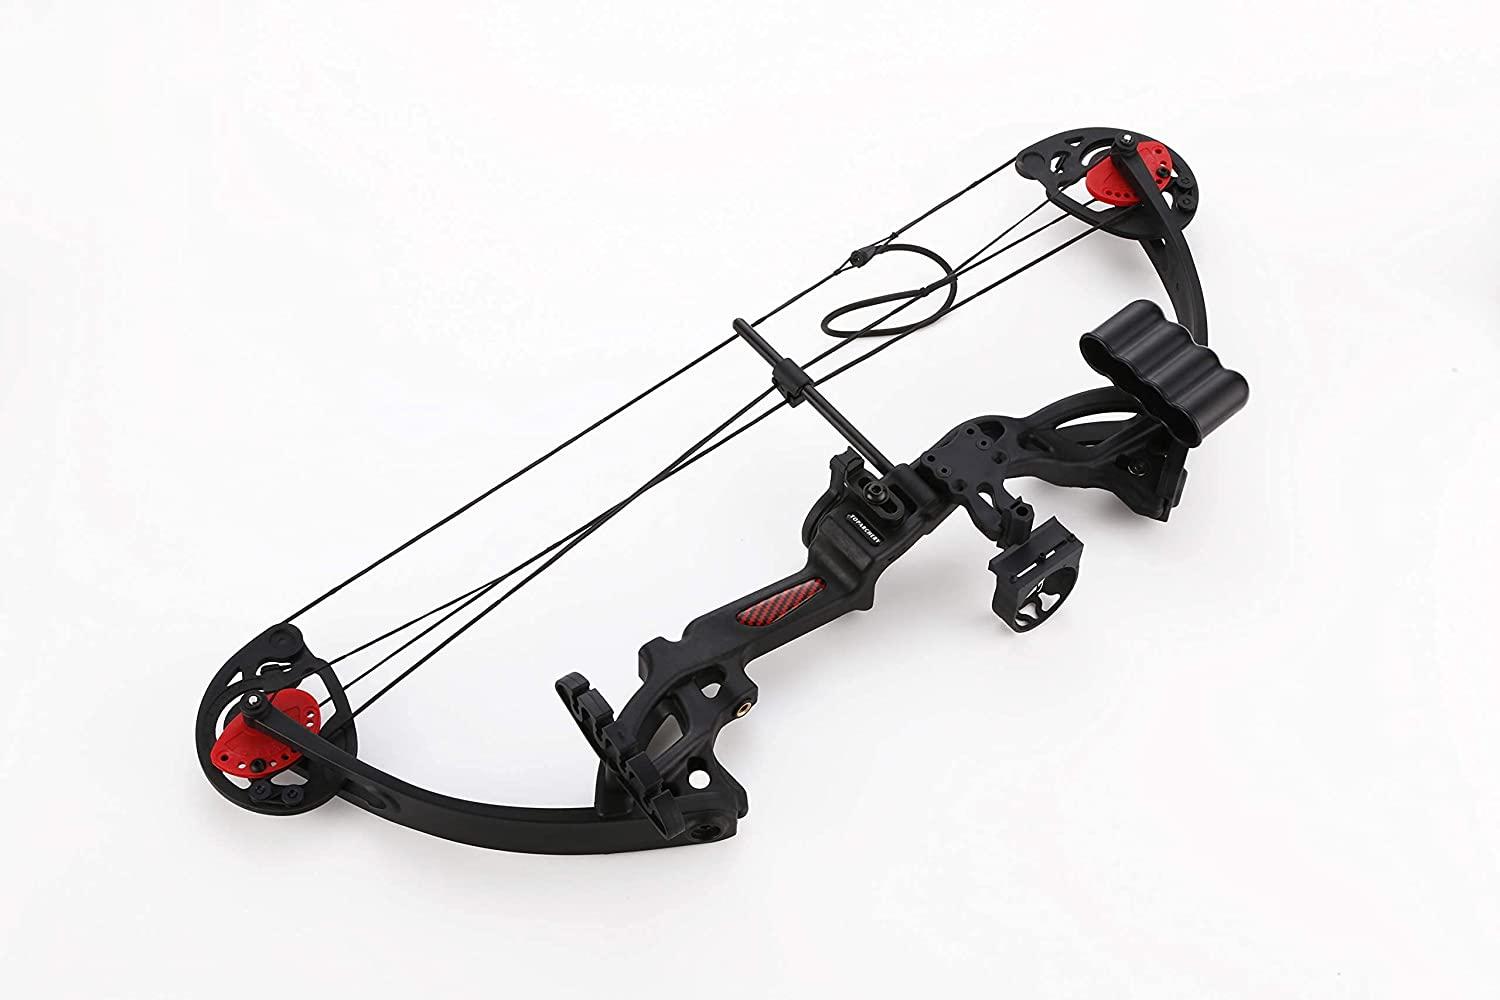 Price: 90141.00 Rs PANDARUS Bowfishing Bow Kit with Arrow Ready to